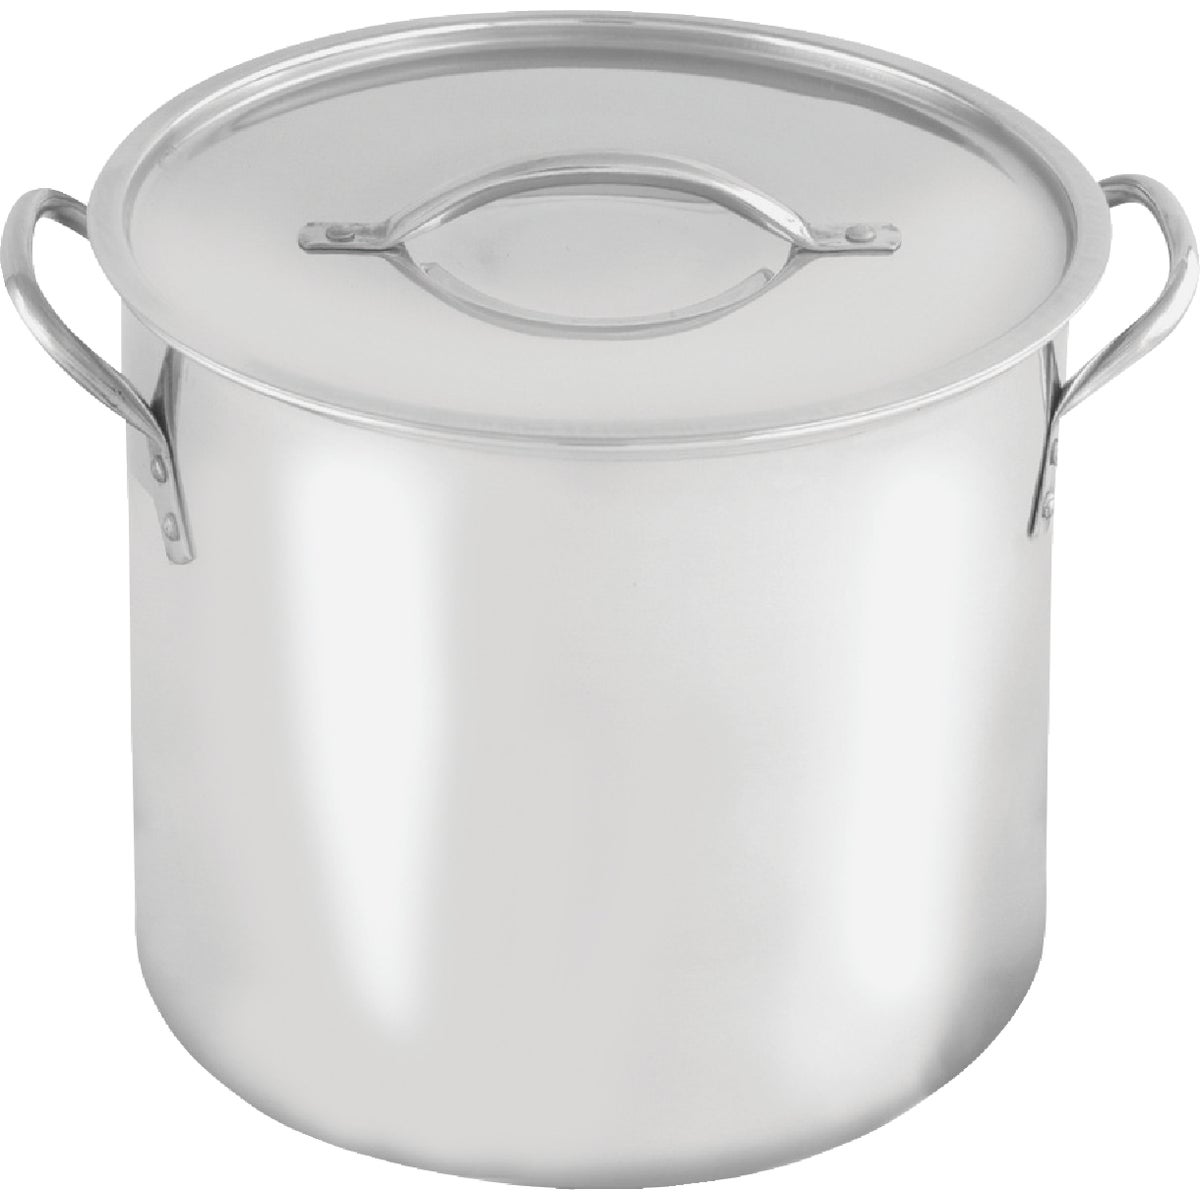 McSunley 20 Qt. Polished Stainless Steel Stockpot